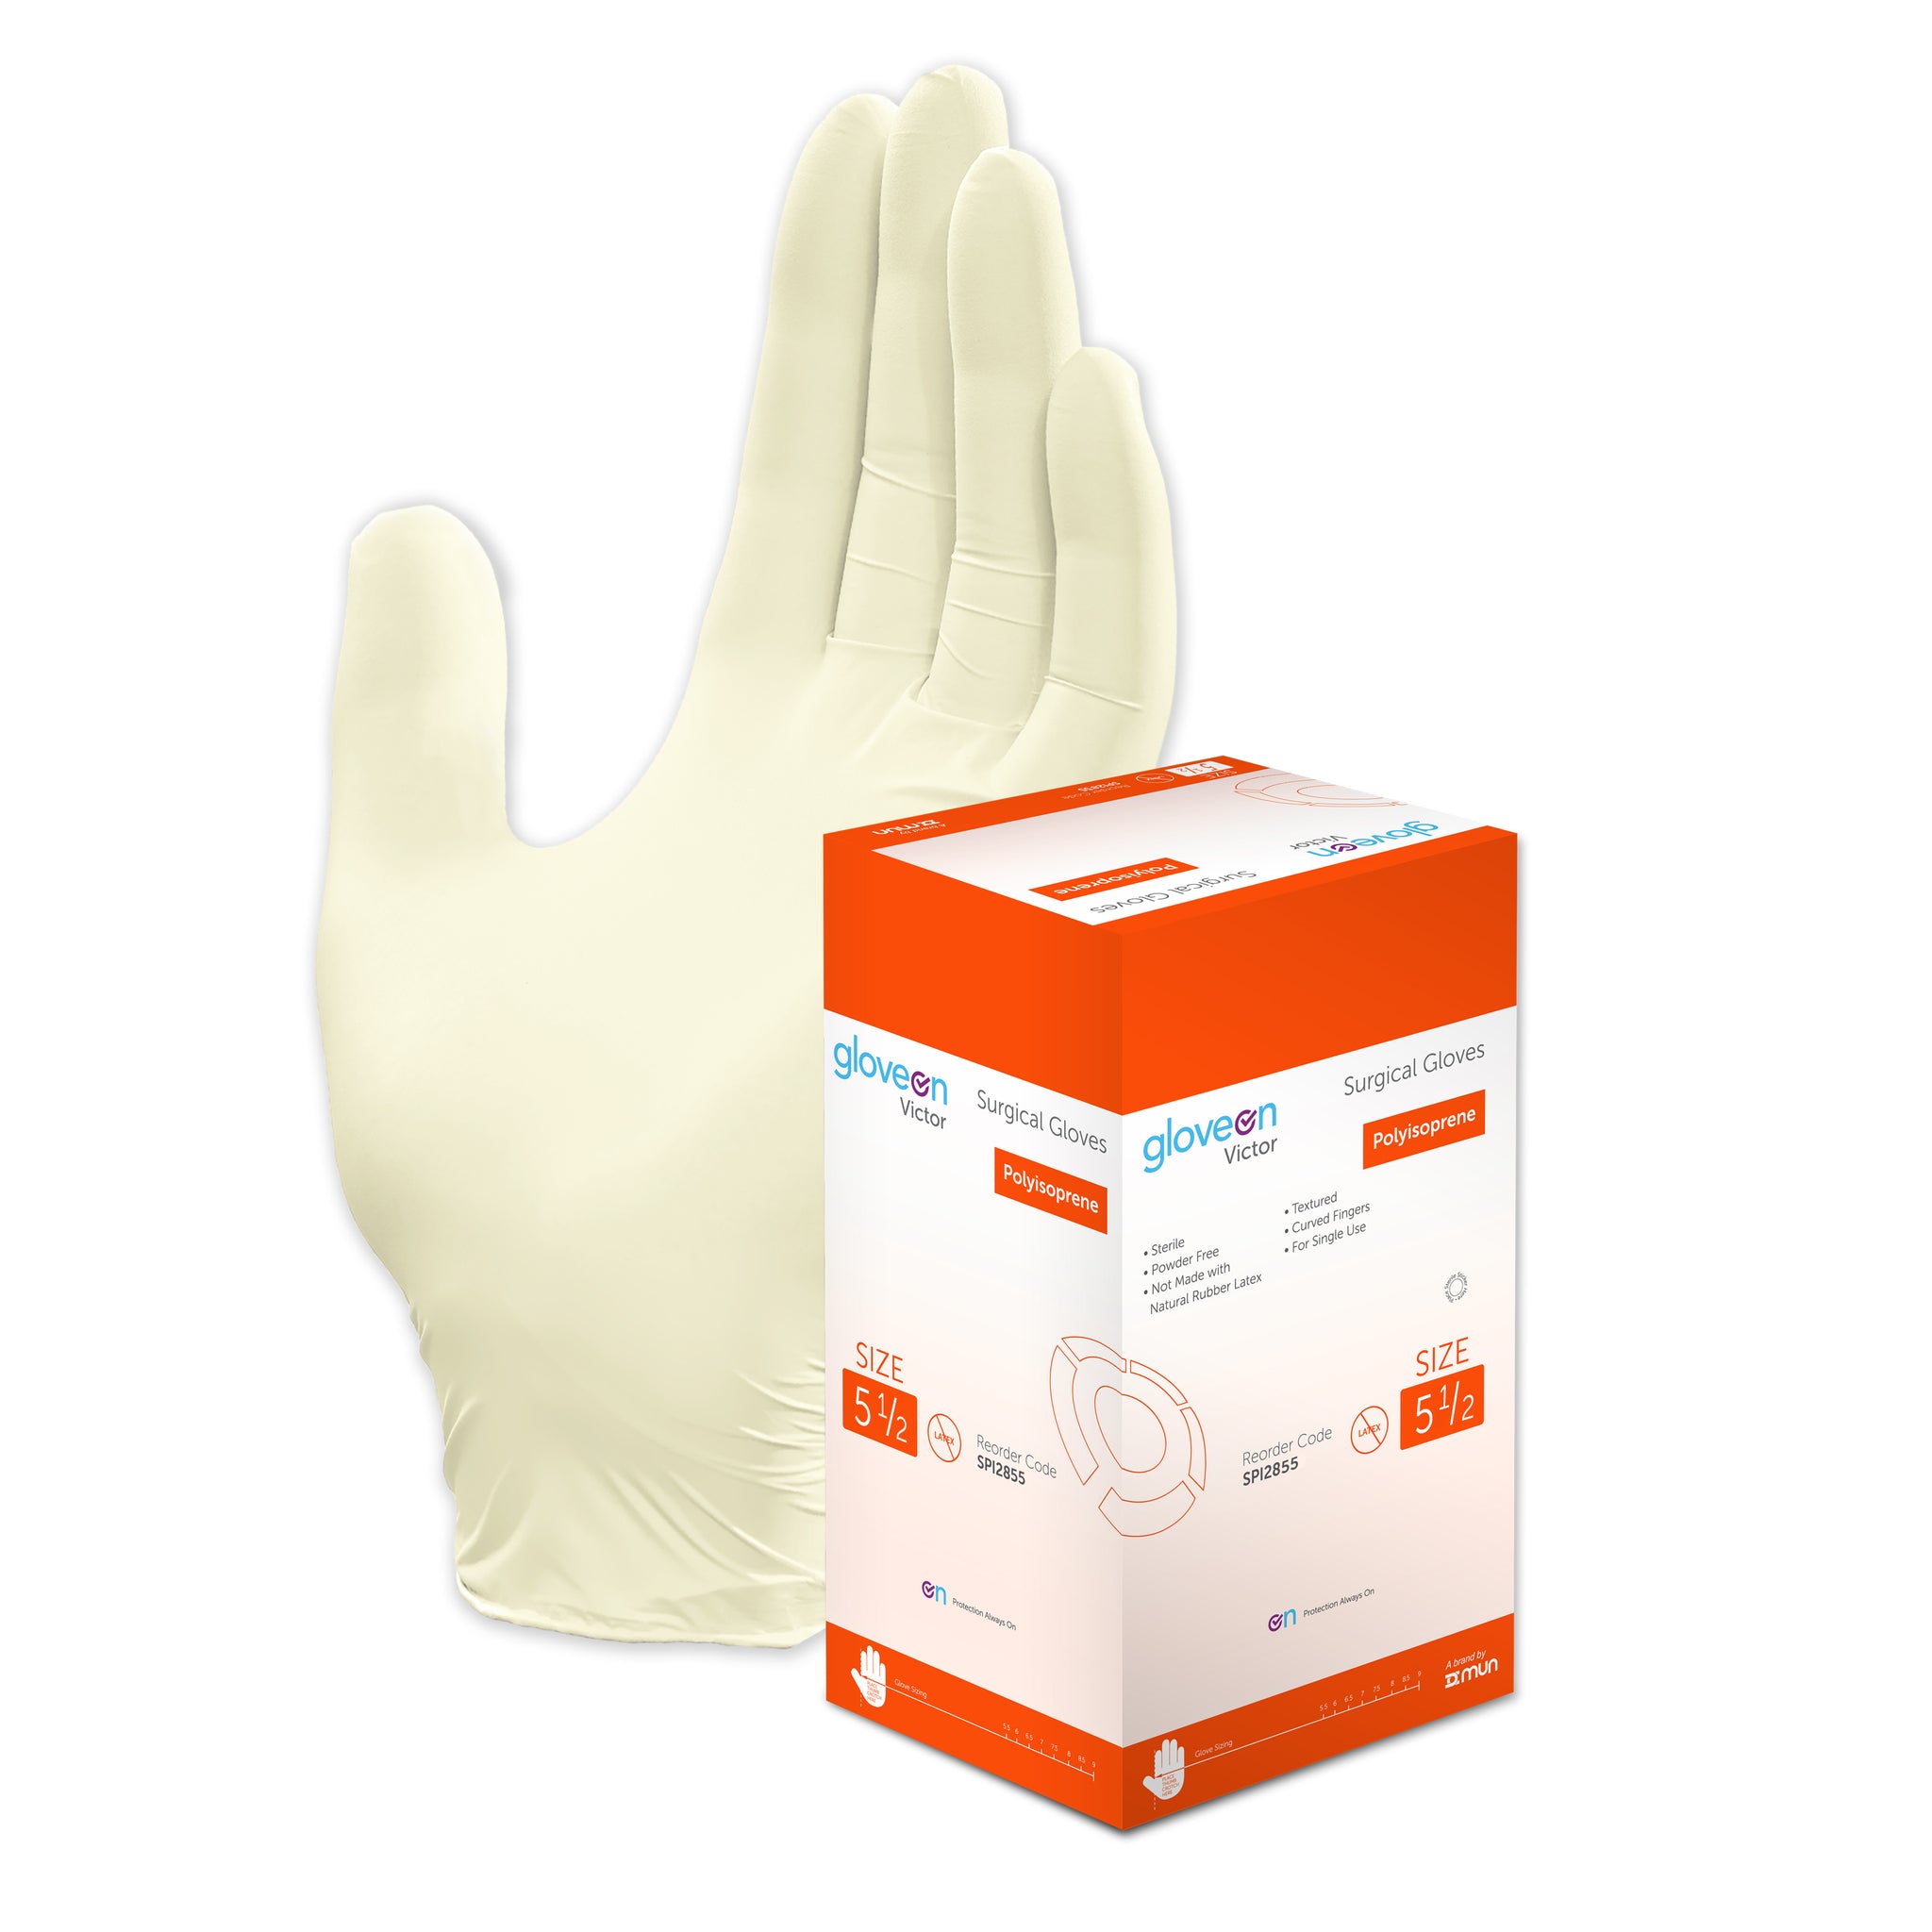 Polyisoprene, Powder Free, Textured, Curved Fingers, Sterile, White - Box of 100, 5.5